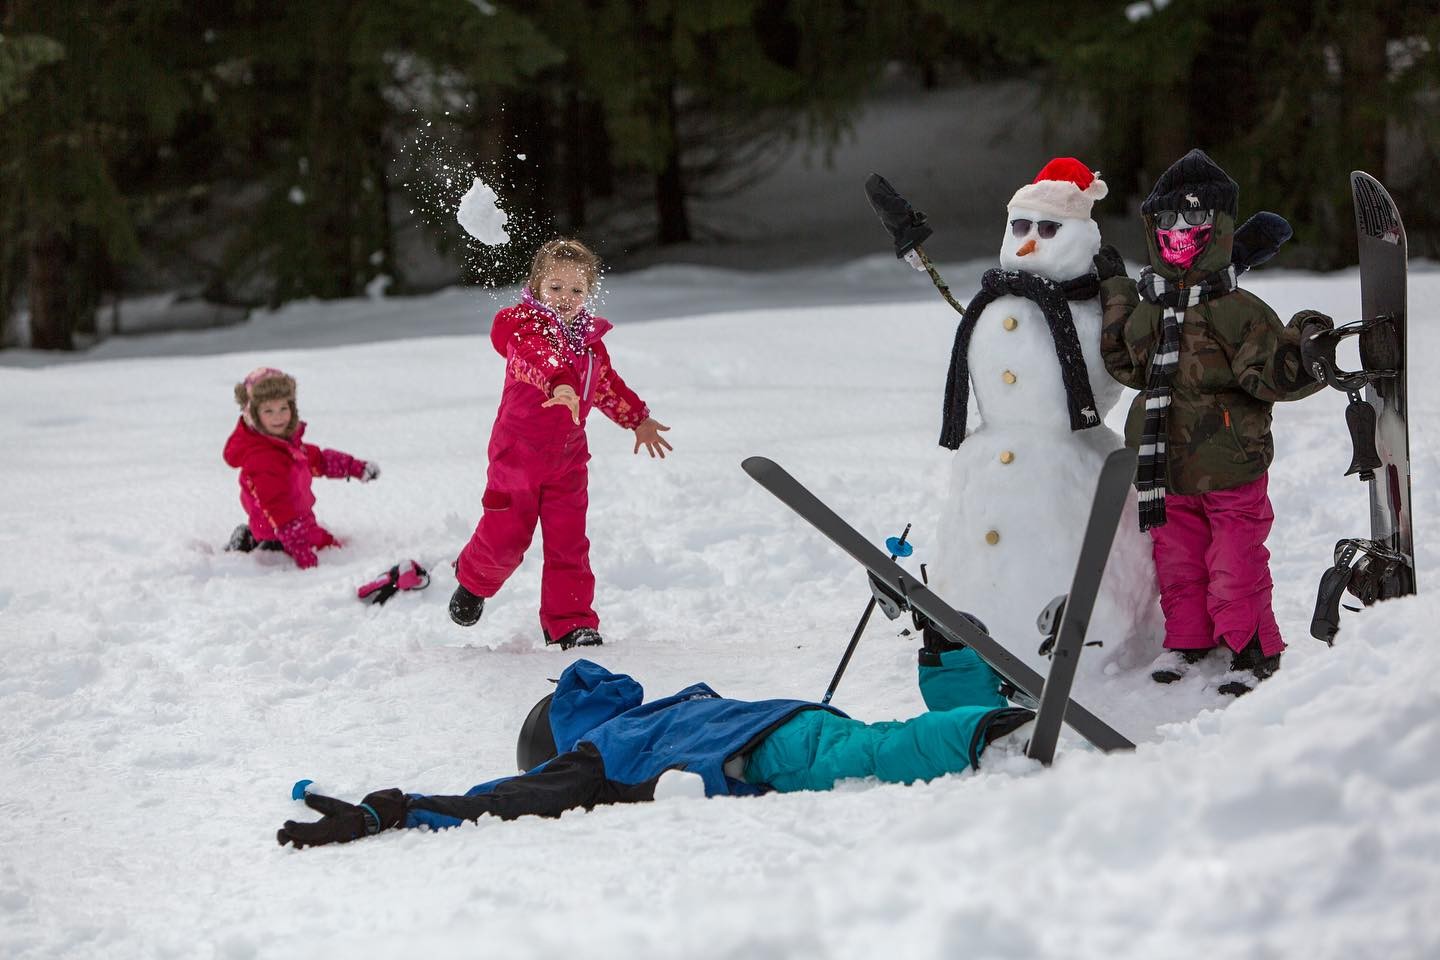 North Shuswap Winter Festival: Spend quality family time together at the North Shuswap Winter Festival every Family Day Weekend! Enjoy tasty treats, outdoor skating, family fun, snowman building, and everyone’s favourite – Bed Races!